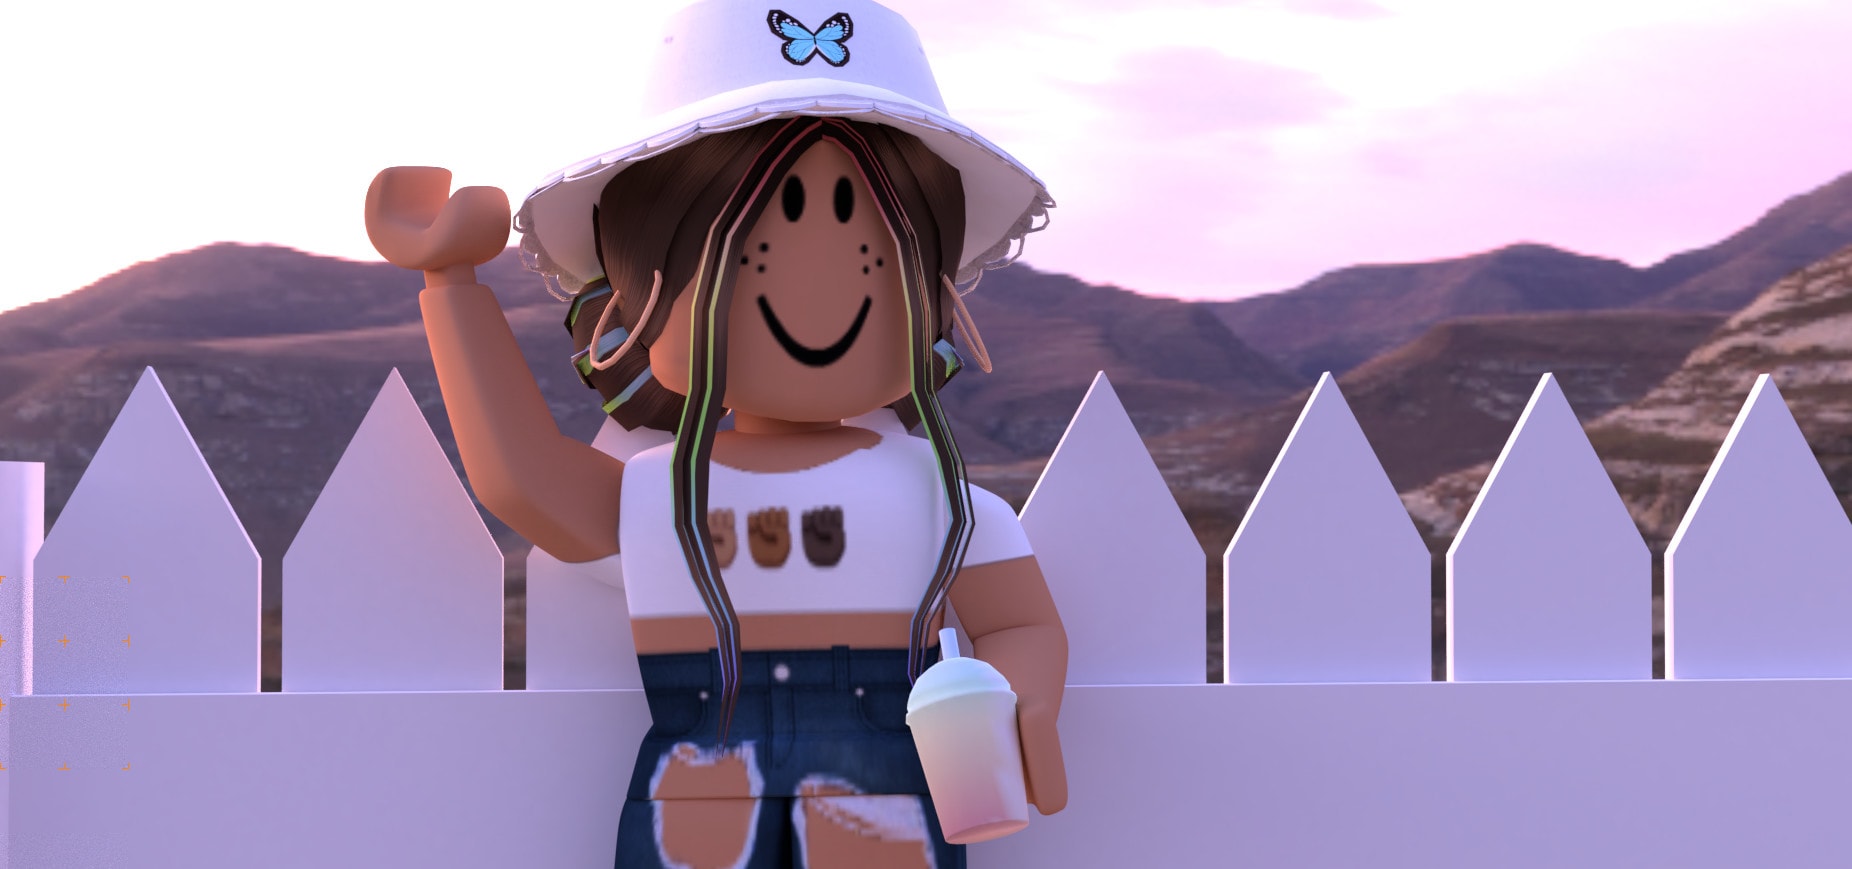 Make An Aesthetic Roblox Gfx By Mxylea - roblox speed gfx aesthetic youtube